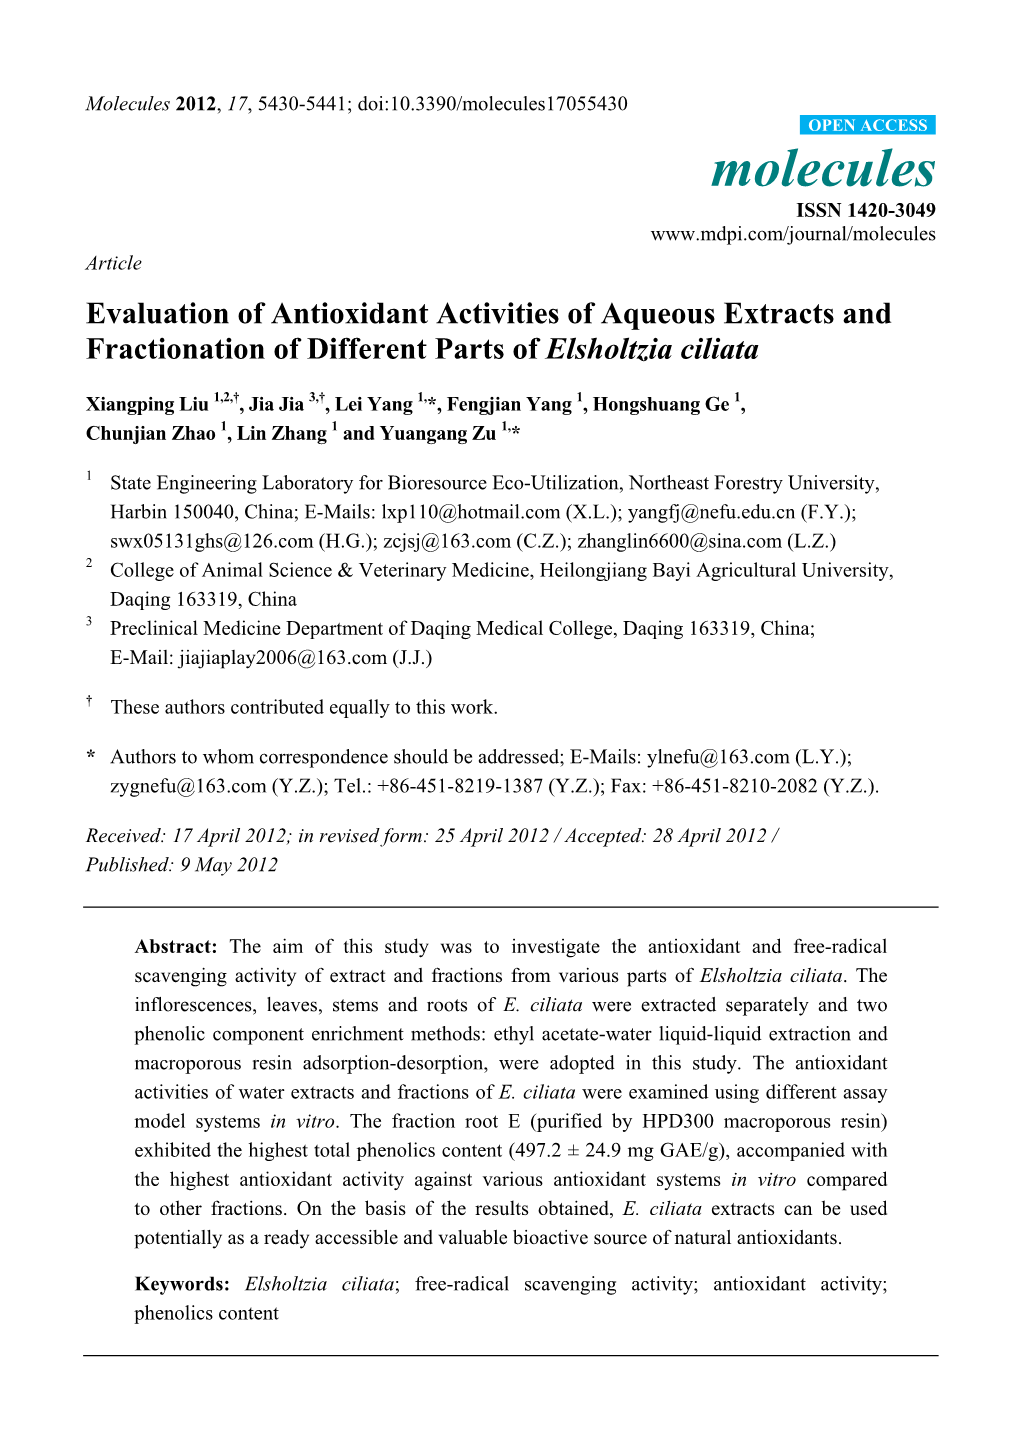 Evaluation of Antioxidant Activities of Aqueous Extracts and Fractionation of Different Parts of Elsholtzia Ciliata